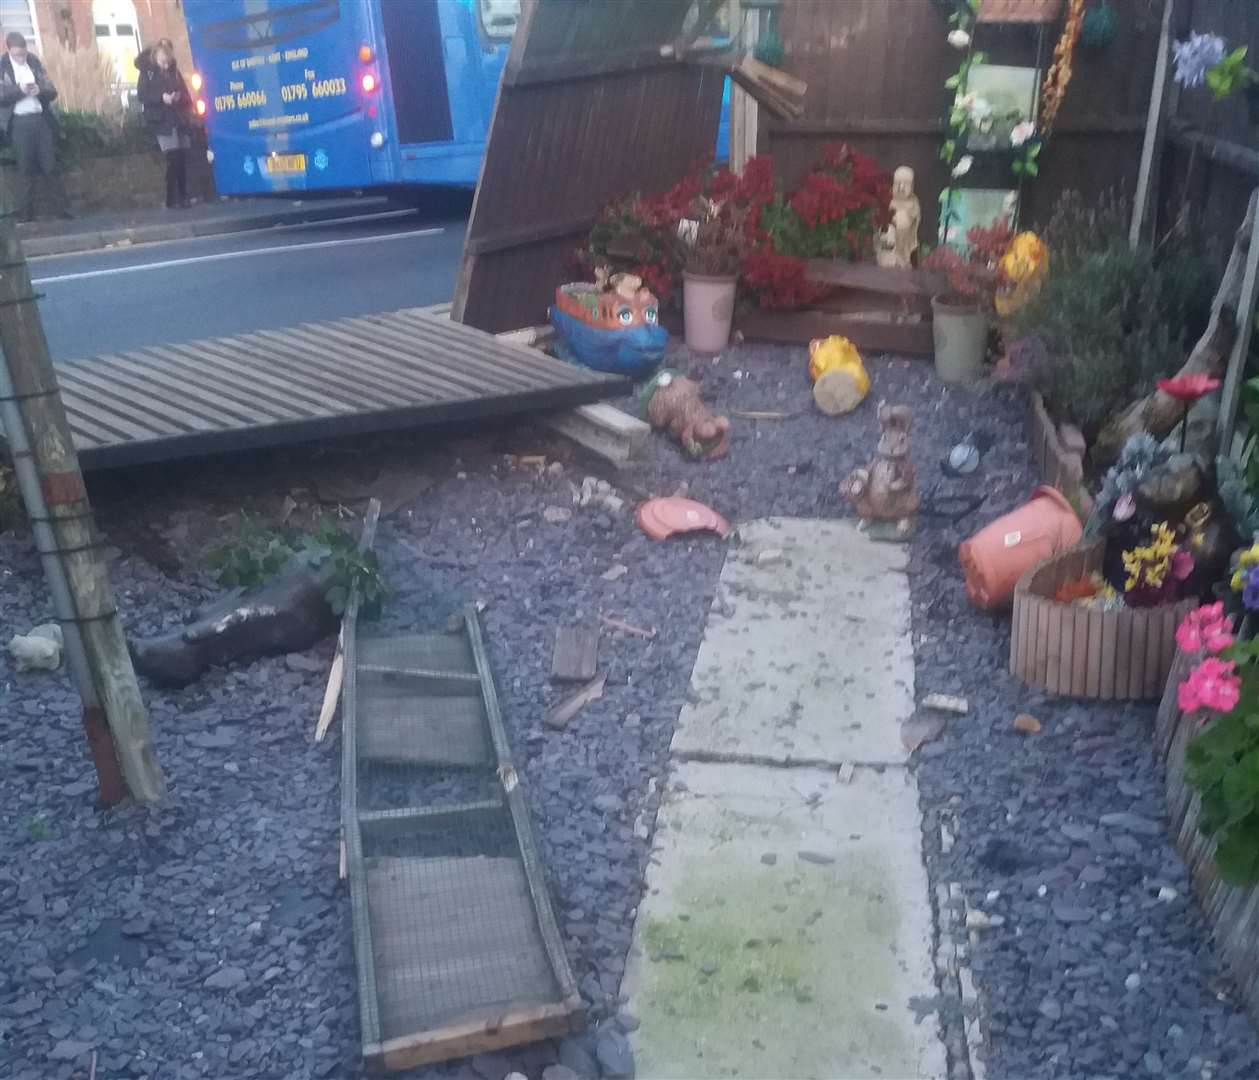 The damage caused to Laura Crisp's garden